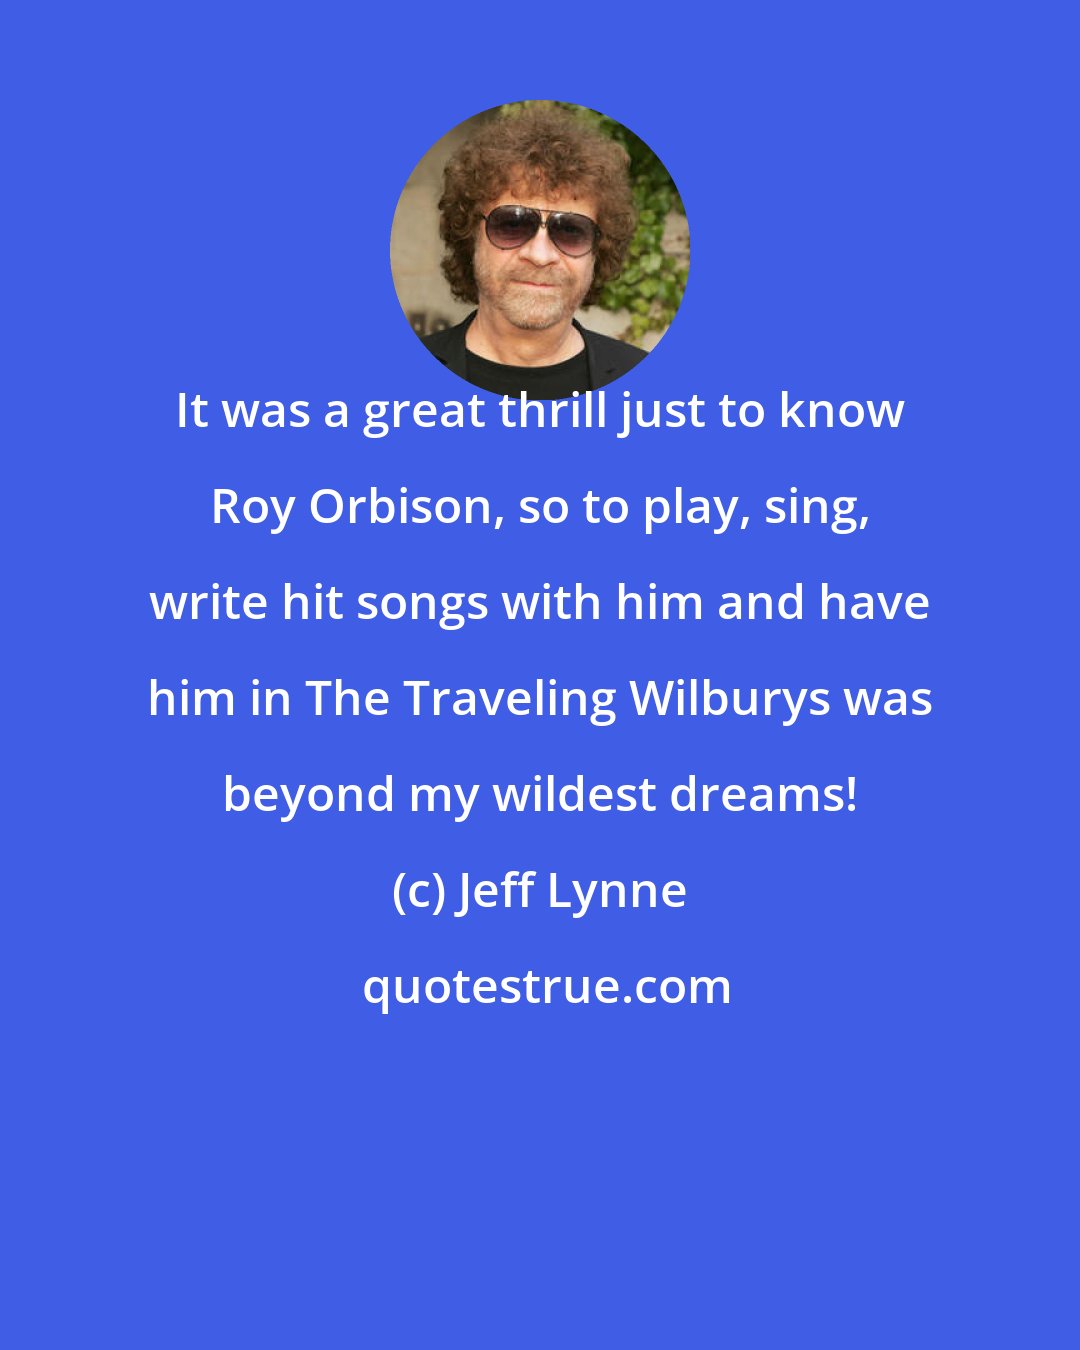 Jeff Lynne: It was a great thrill just to know Roy Orbison, so to play, sing, write hit songs with him and have him in The Traveling Wilburys was beyond my wildest dreams!